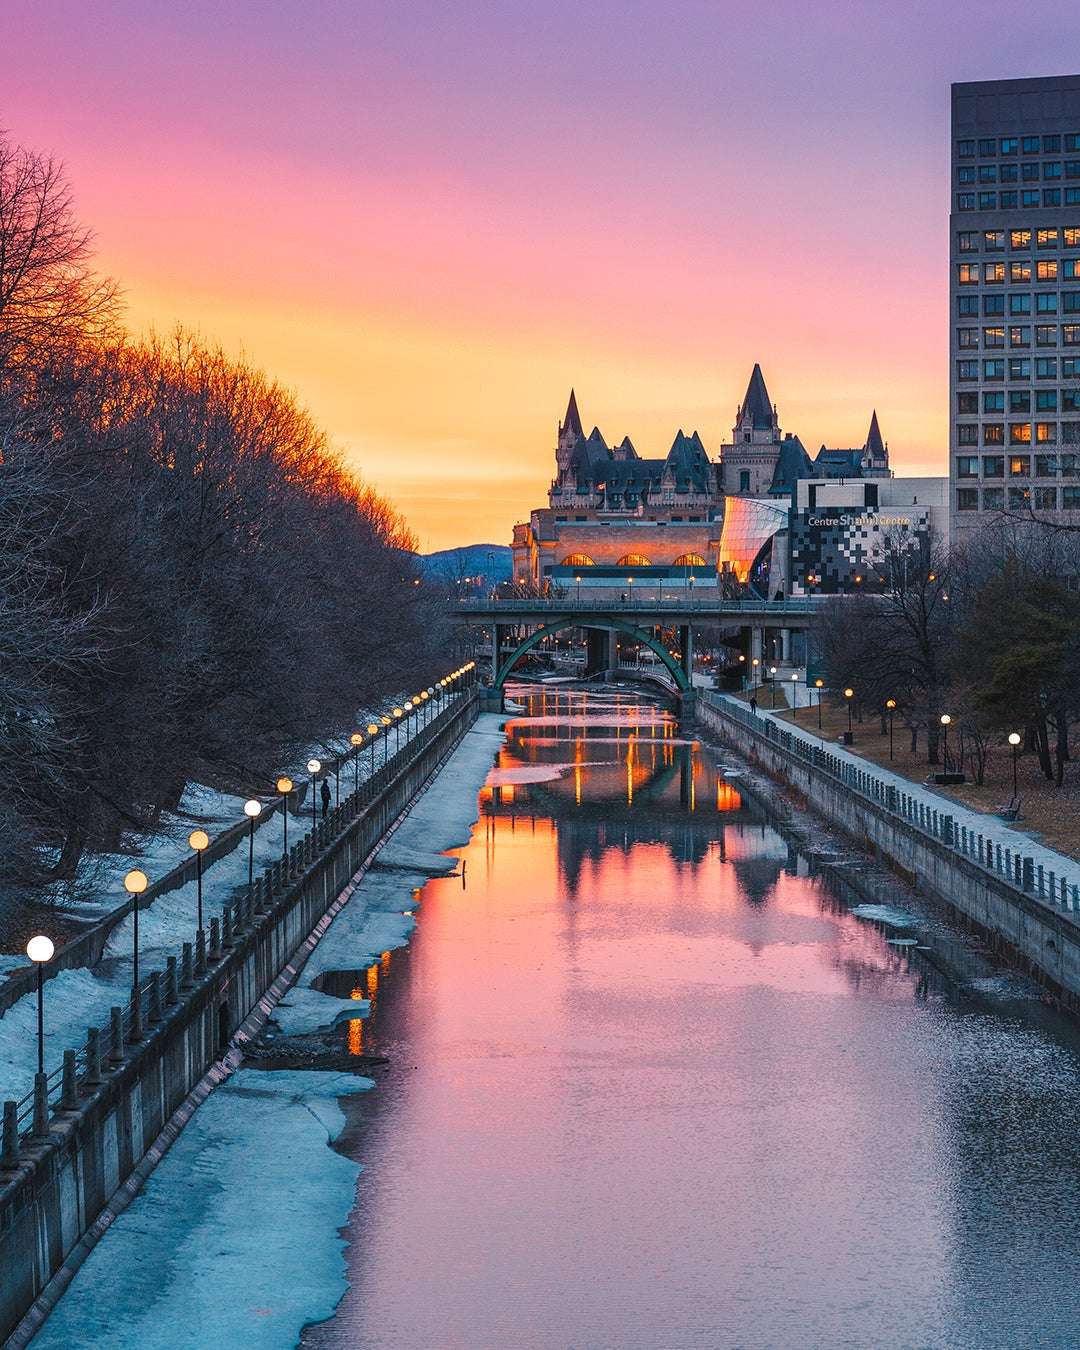 image showing [OC] after 3 weeks of negative press, here is a pic of Ottawa at sunset.